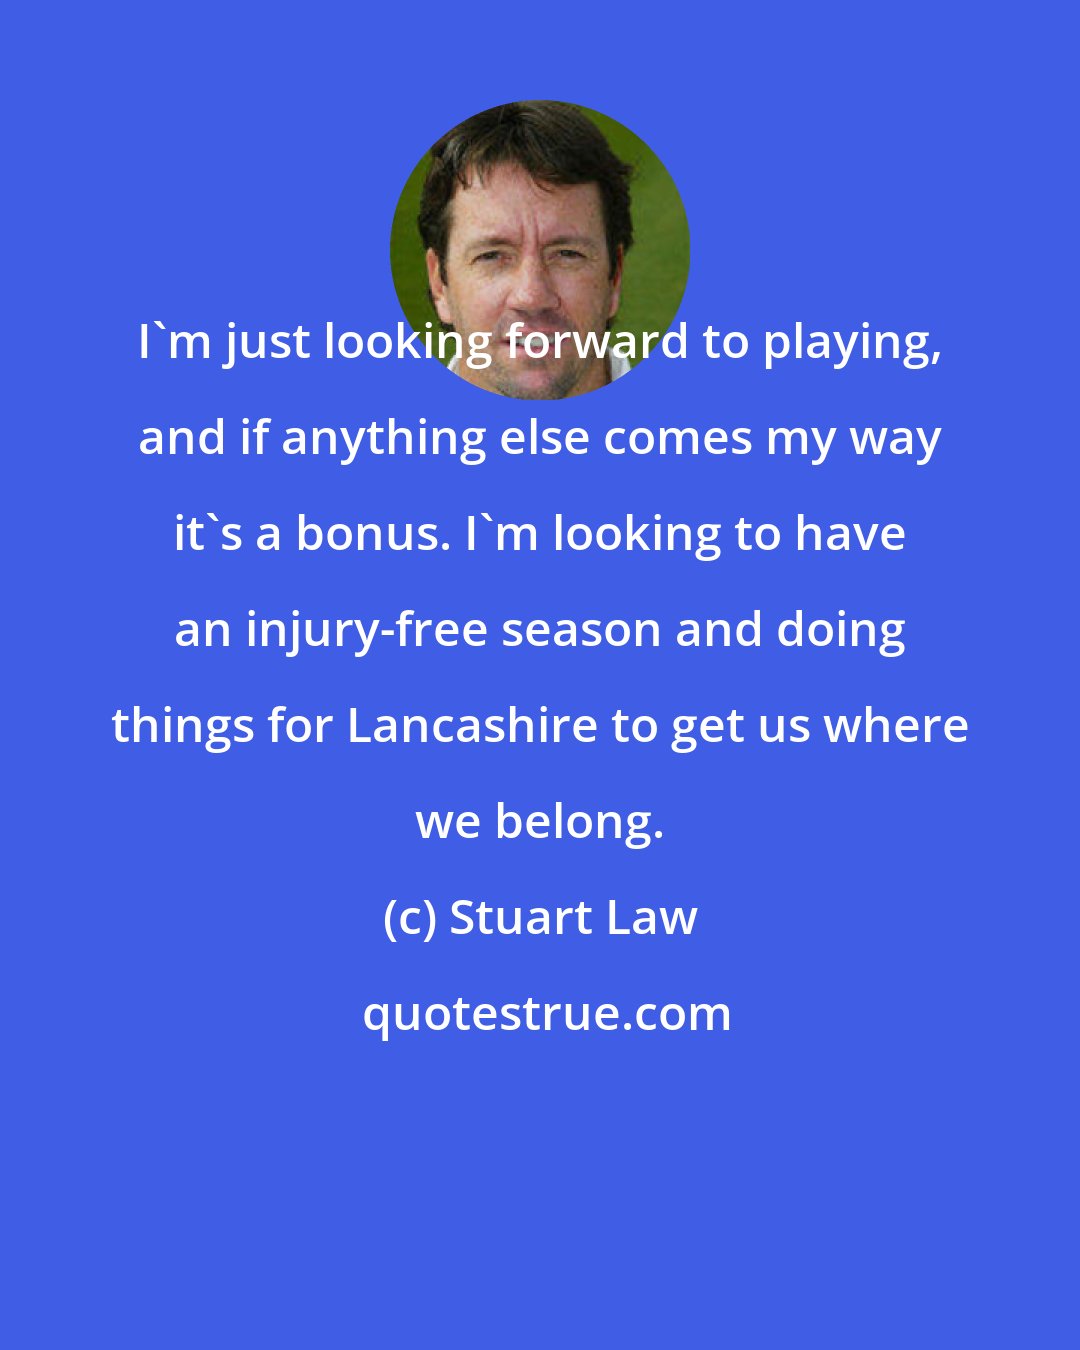 Stuart Law: I'm just looking forward to playing, and if anything else comes my way it's a bonus. I'm looking to have an injury-free season and doing things for Lancashire to get us where we belong.